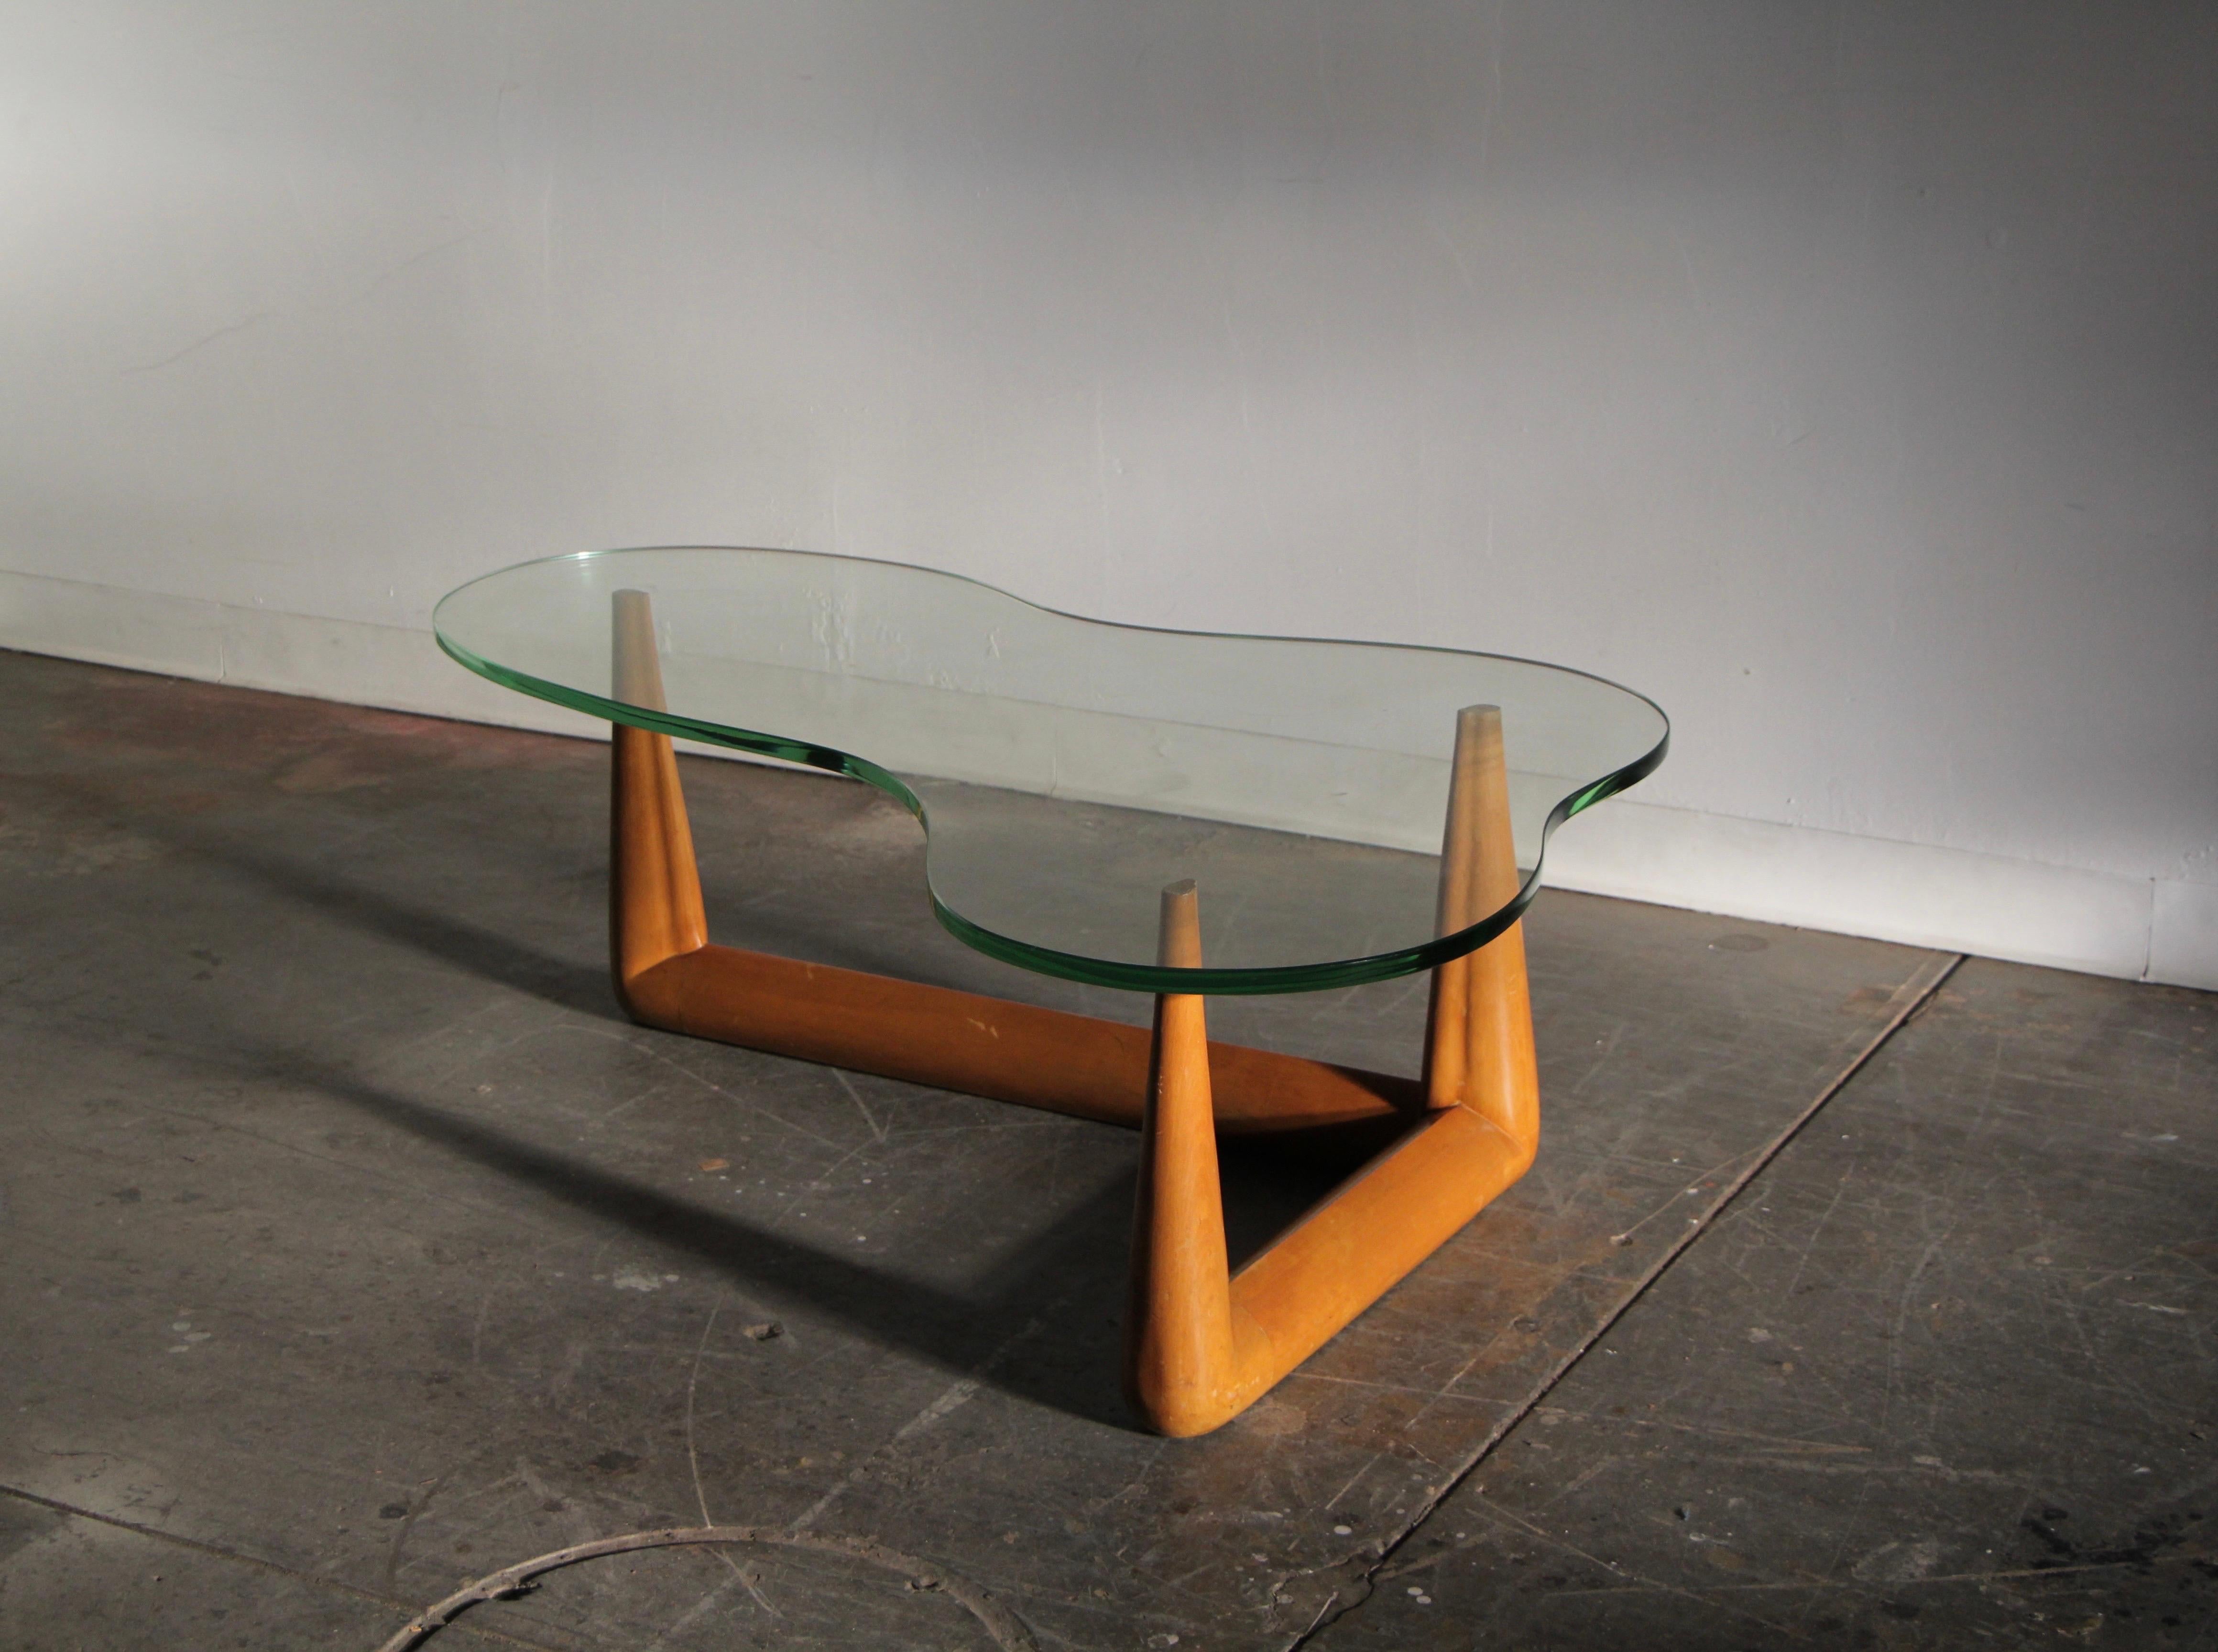 An exception, early, and completely original example of T.H. Robsjohn-Gibbings' biomorphic coffee table for Widdicomb, circa 1950s. Consisting of a sculpted, solid maple, three-prong base, and a sinuous, organic form, Uranium glass top, this design